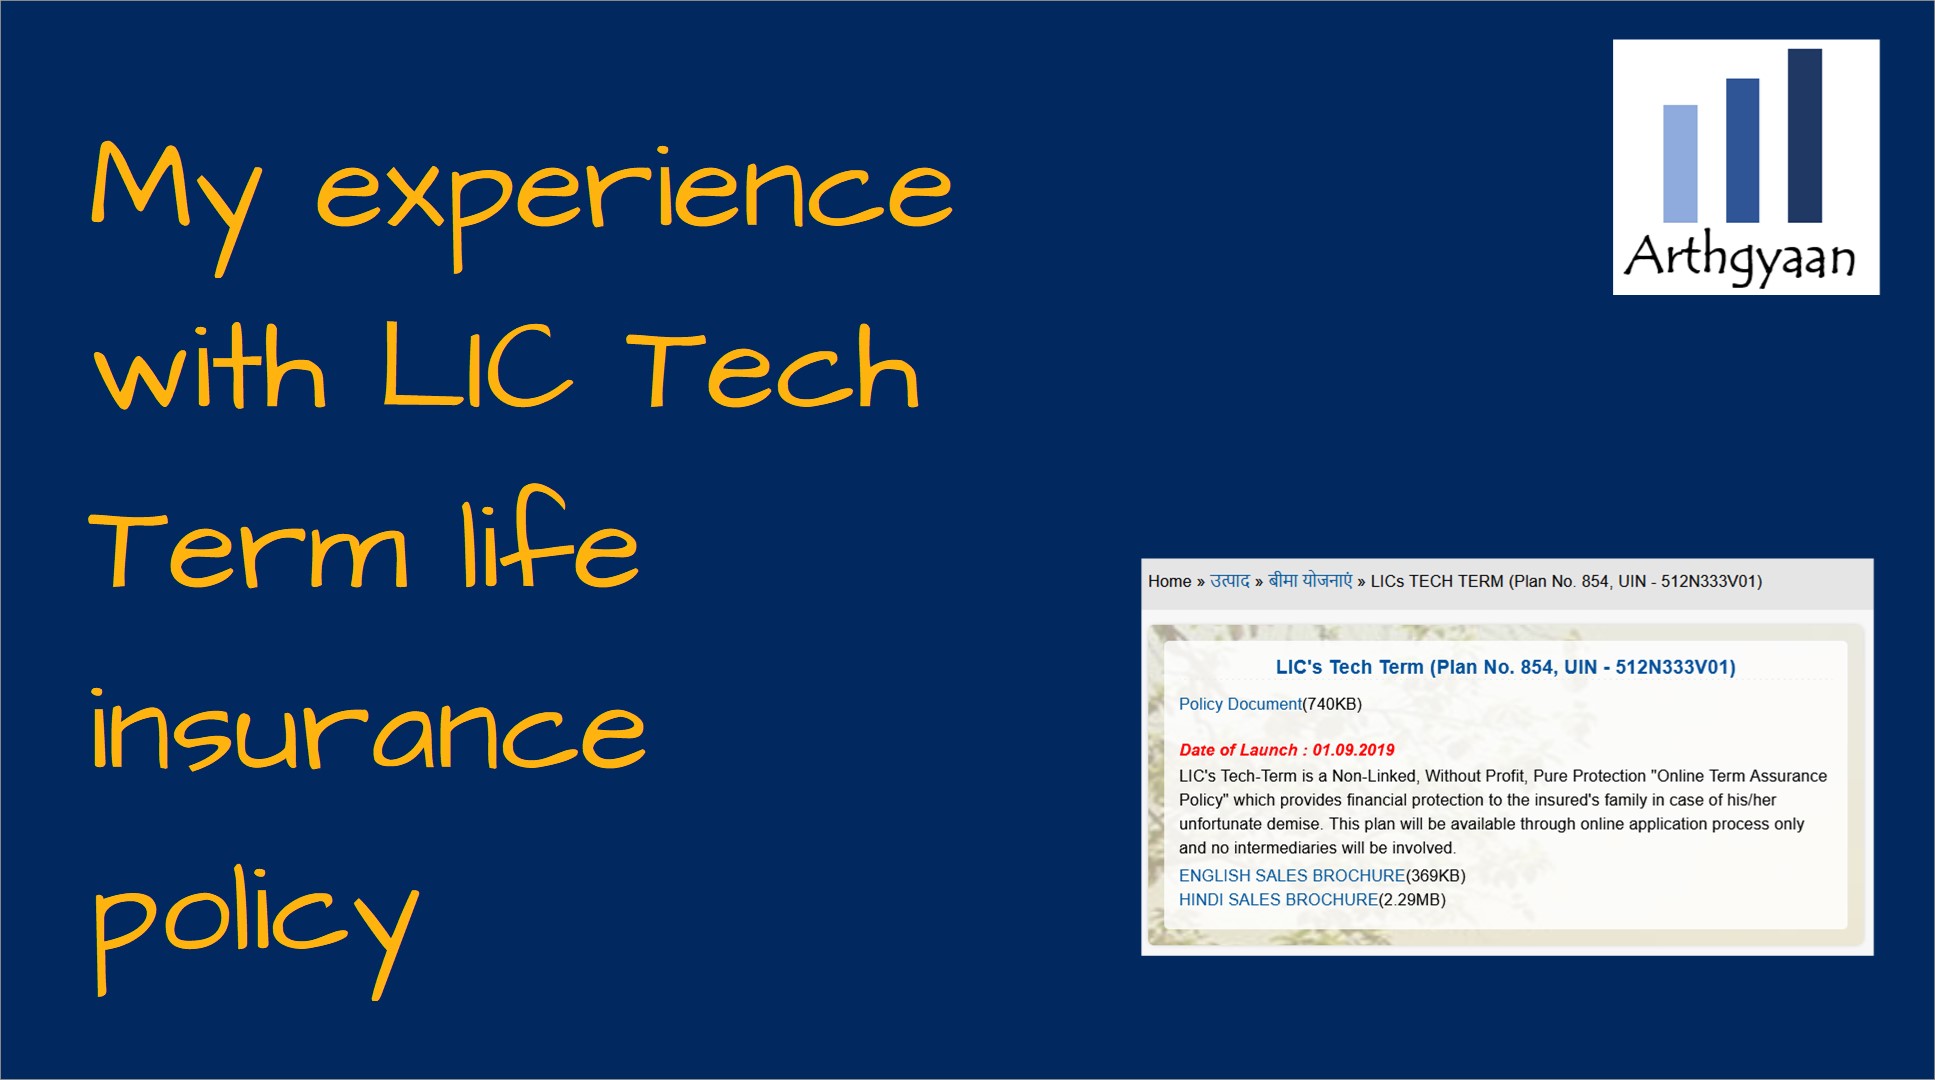 My experience with the LIC Tech Term life insurance policy  Arthgyaan